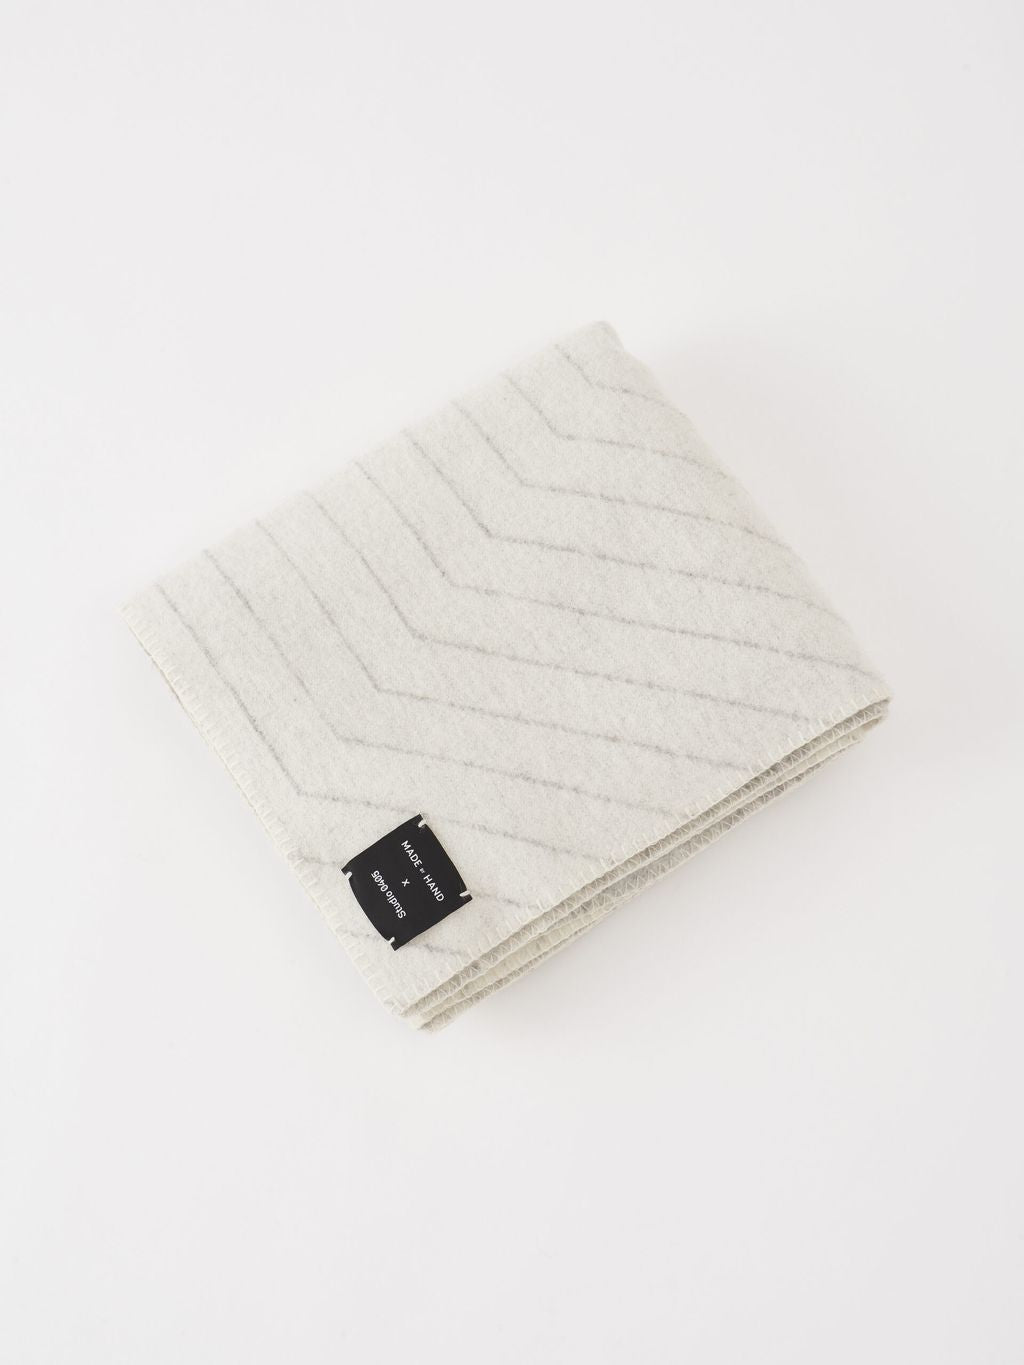 Made By Hand Pinstripe Blanket, White